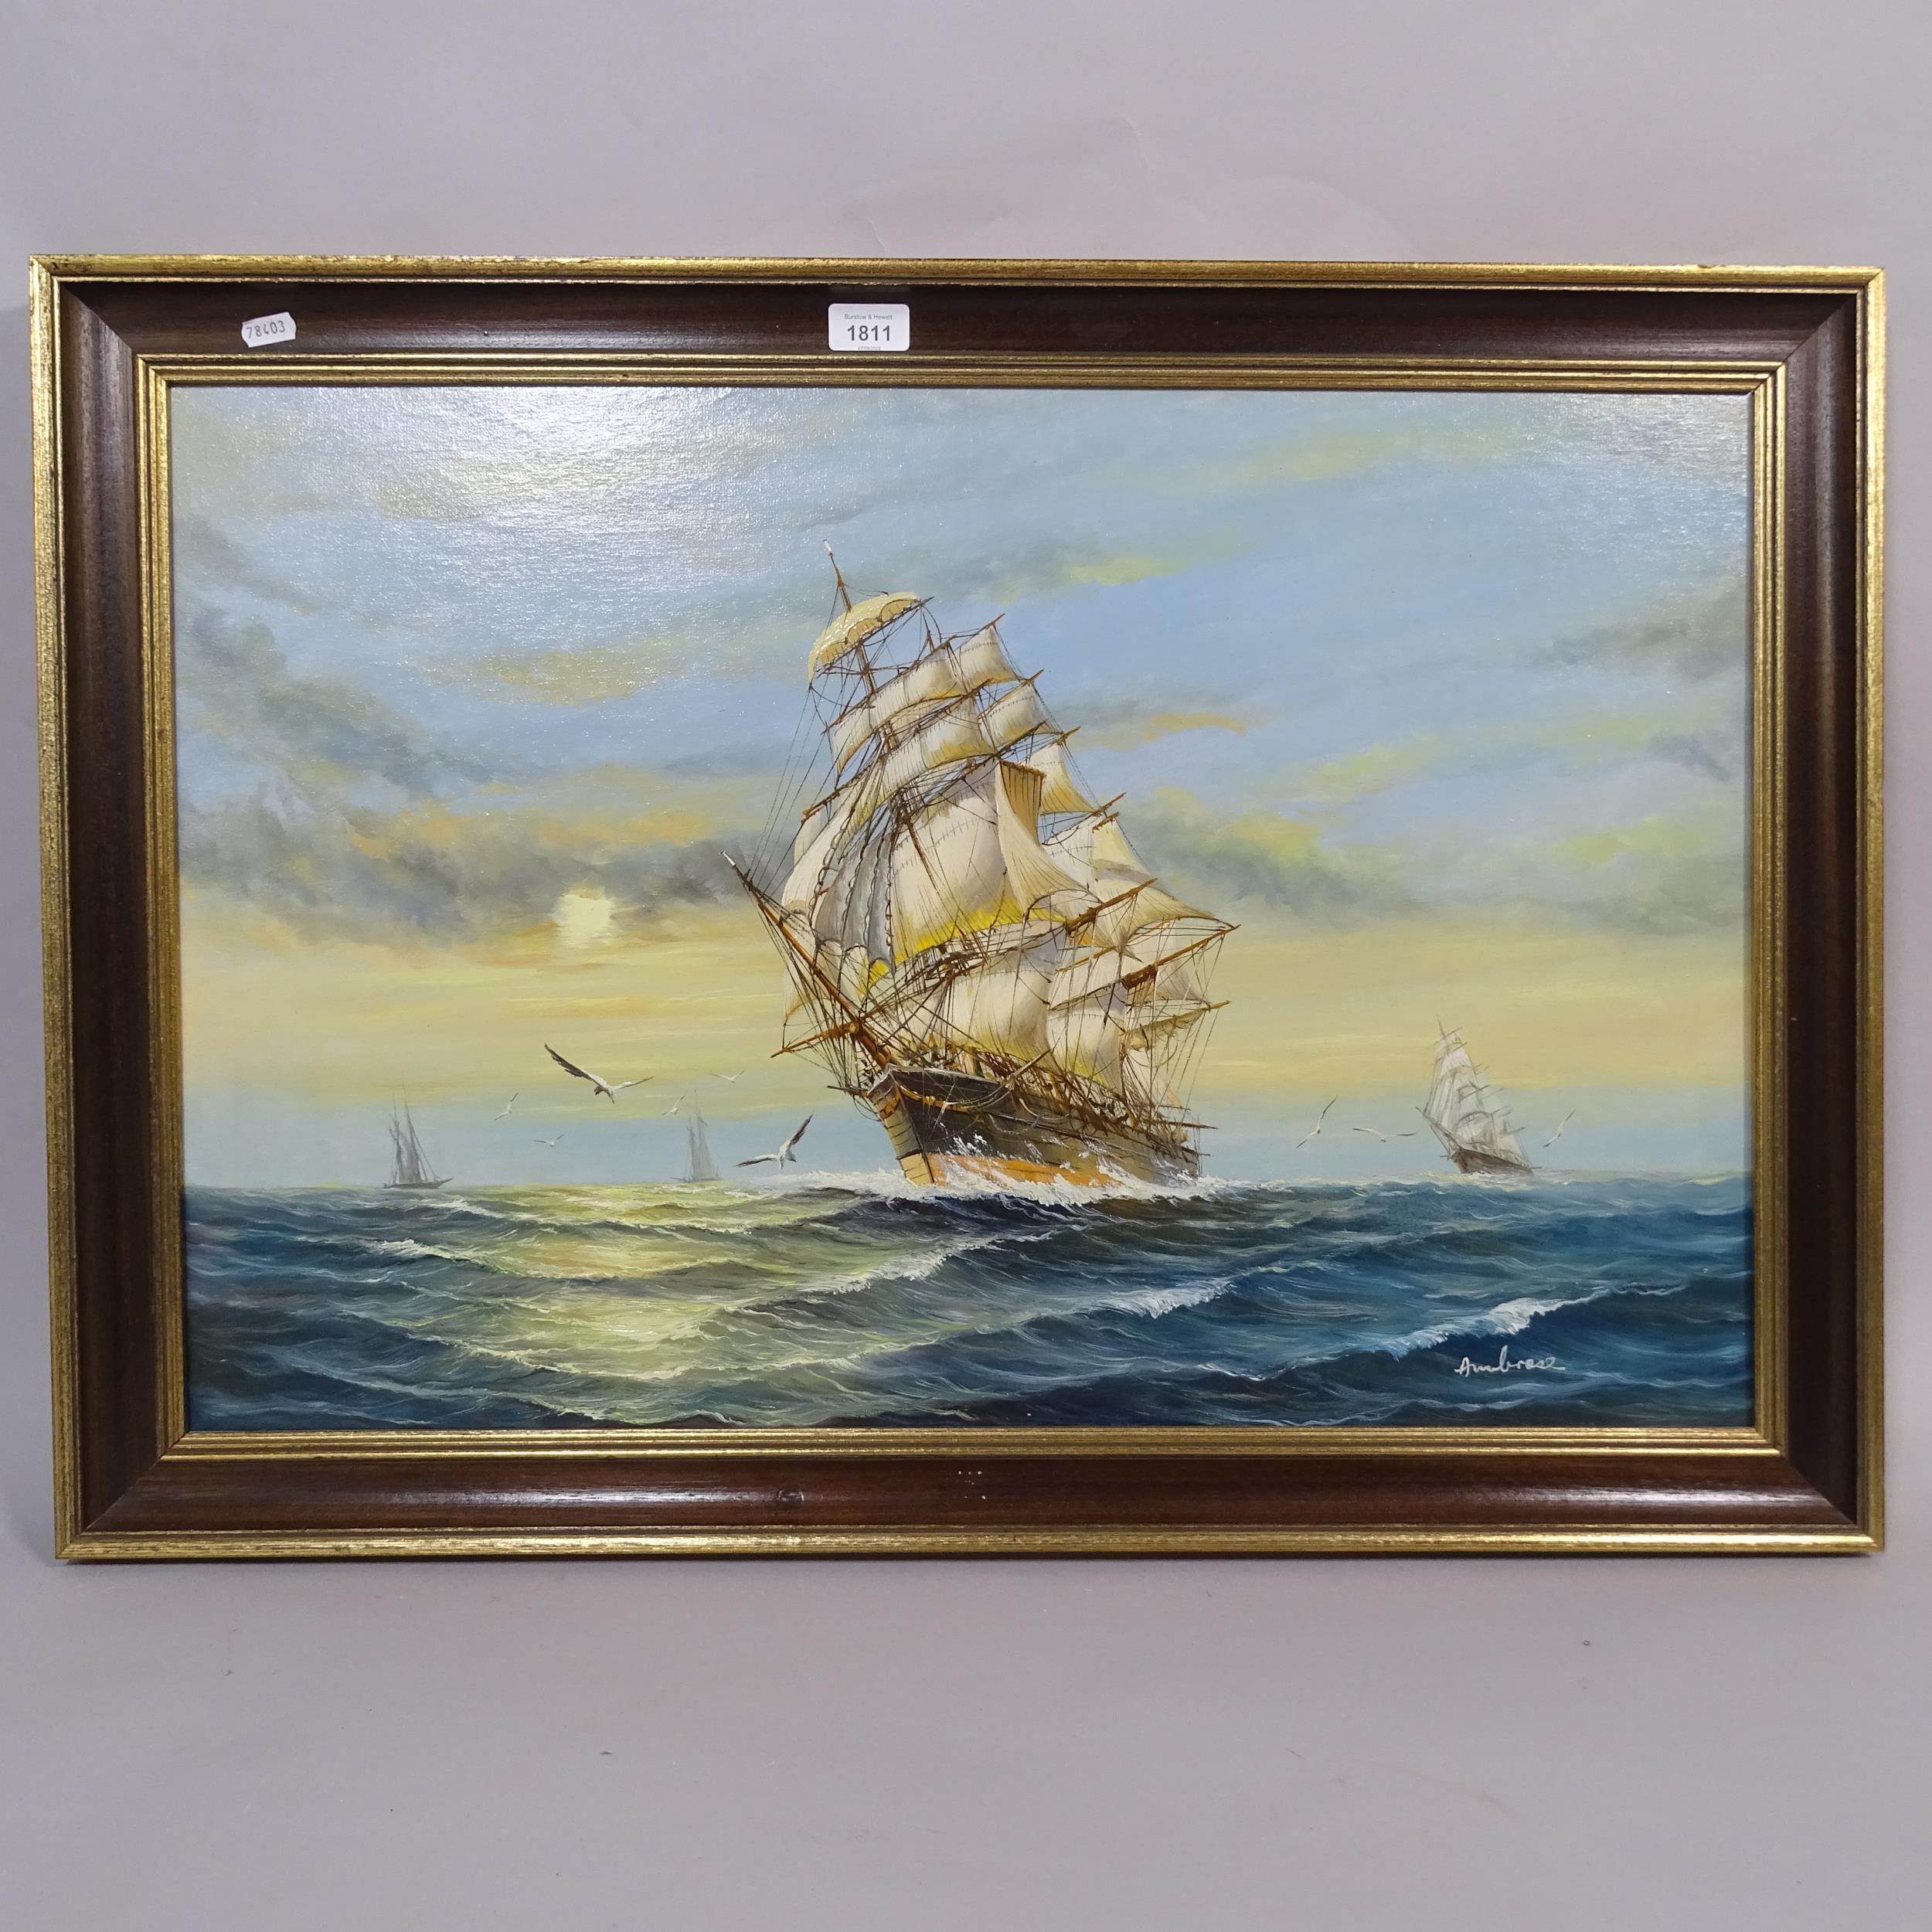 Ambrose, oil on canvas, 3-masted ship at sail, 60cm x 86cm overall, framed